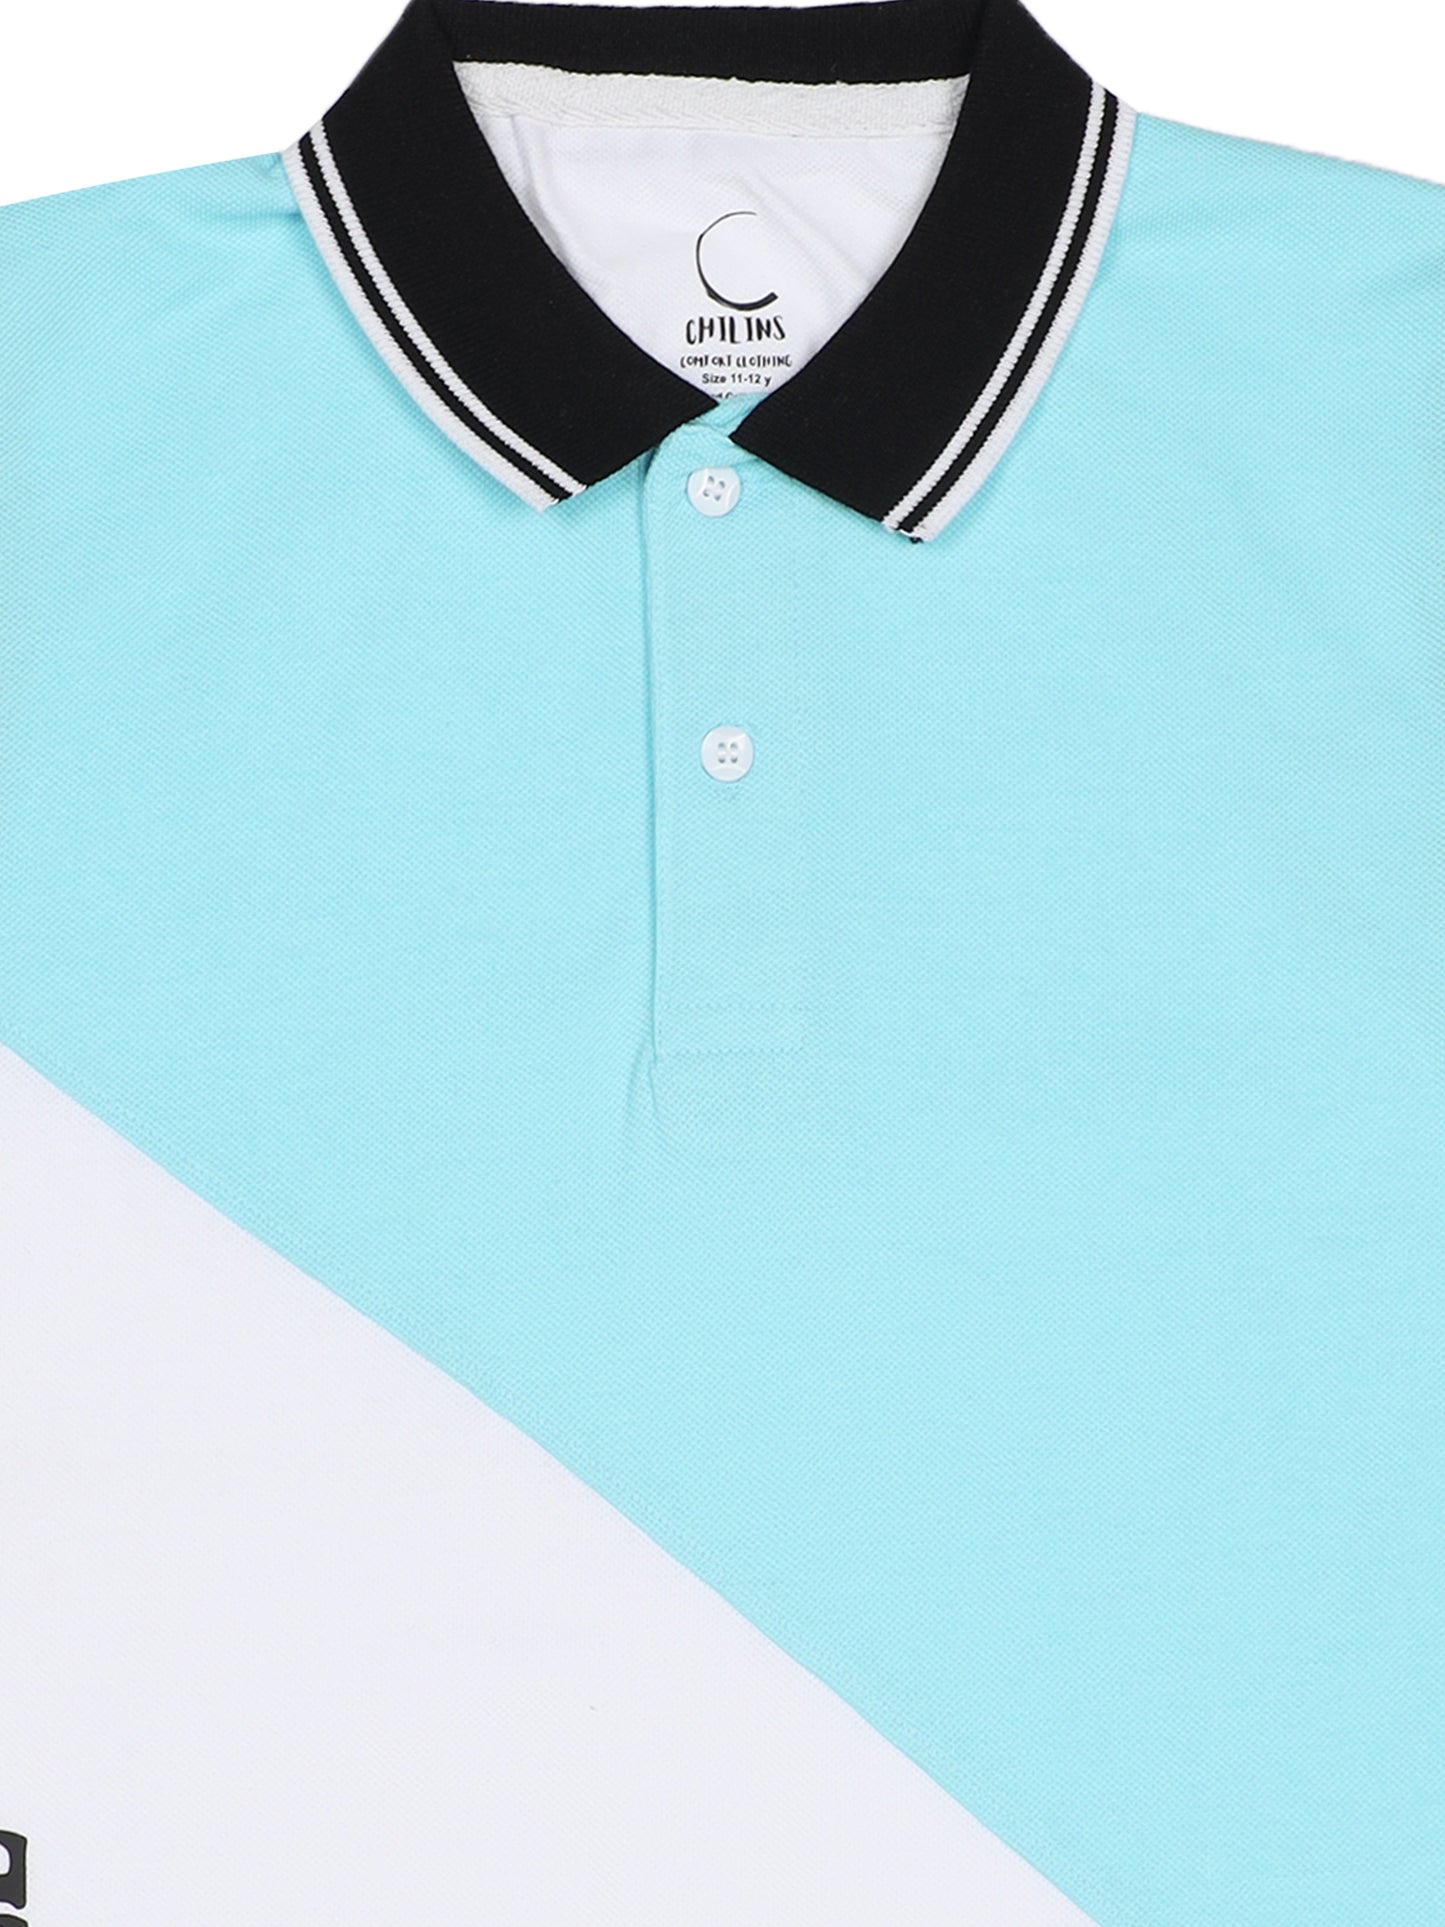 Chilins Boys Polo Tshirt, Color- Sky Blue/ Turquoise & White